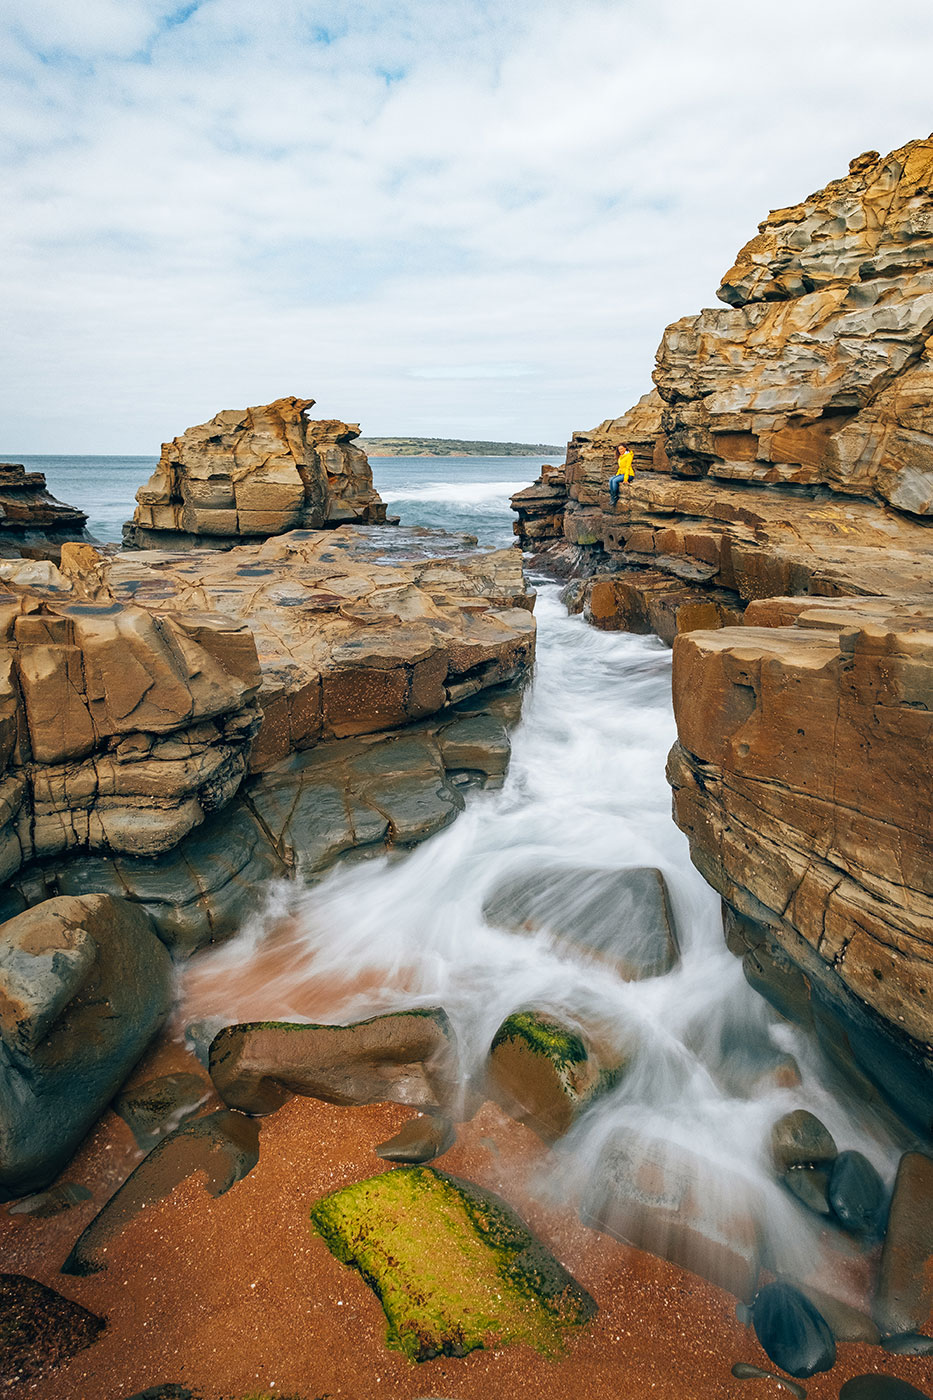 Best things to do in Phillip Island - Cadillac Canyon at Bore Beach